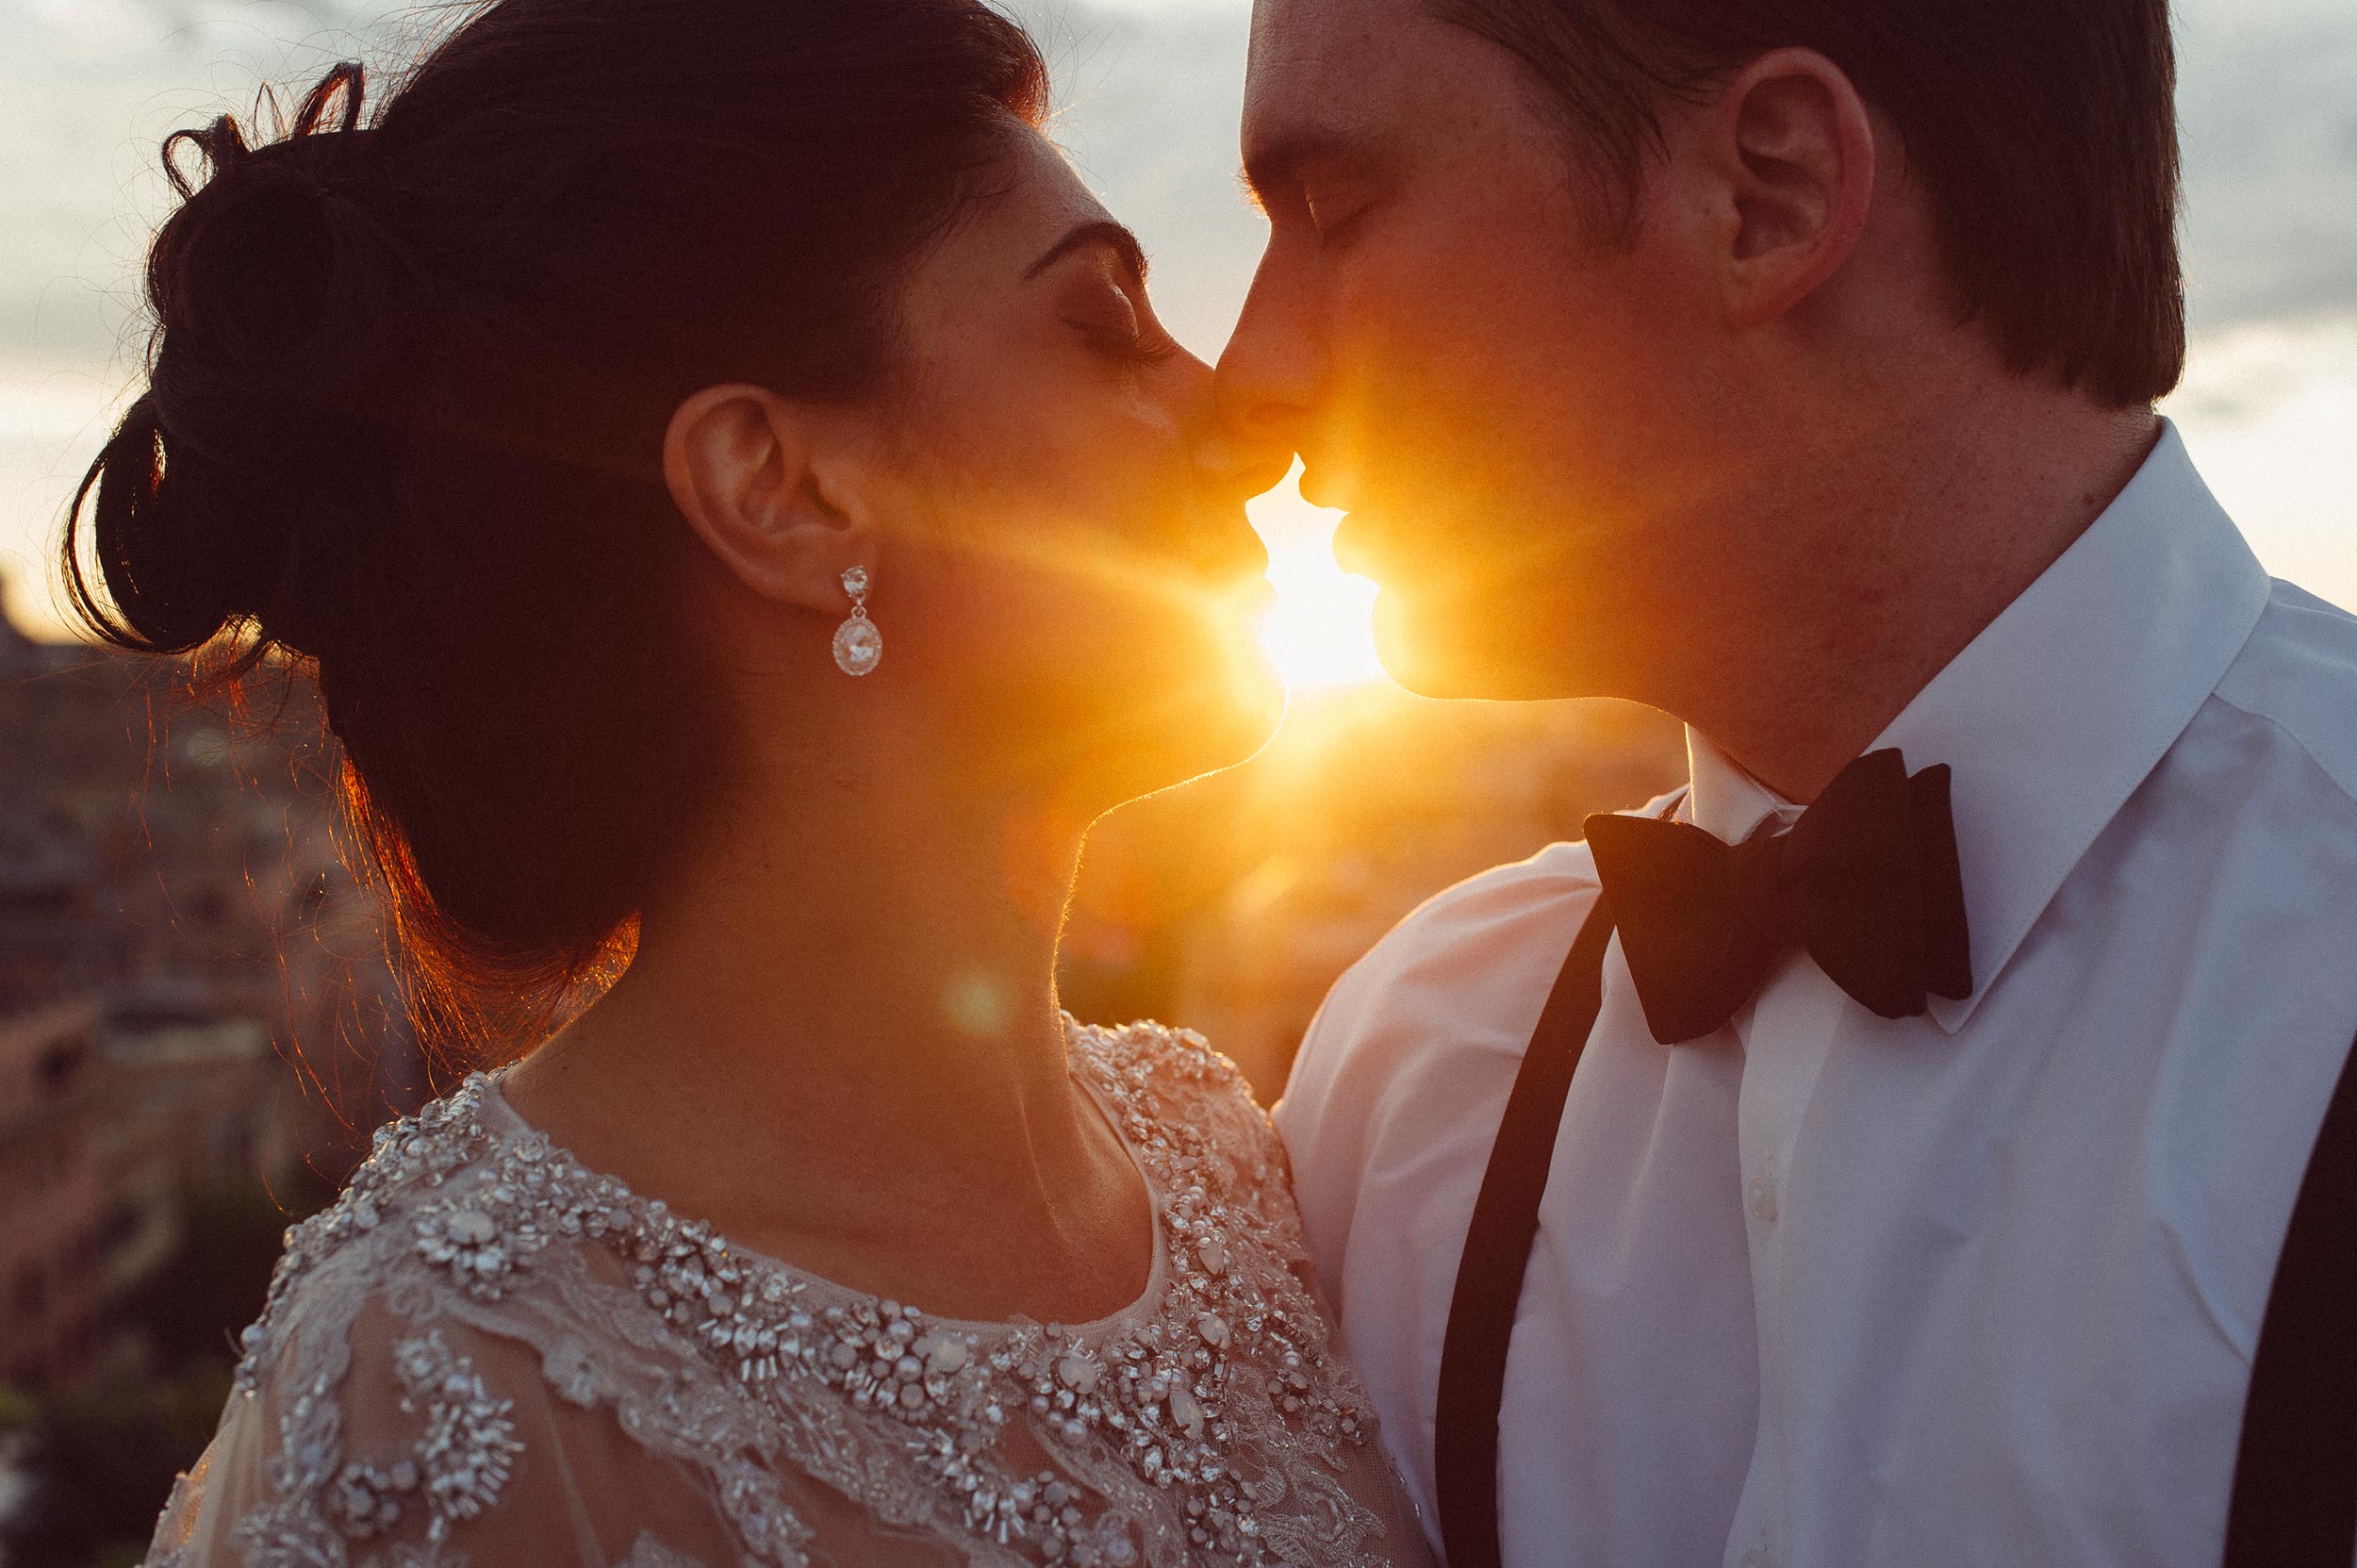 bride-and-groom-kissing-at-sunset-in-rome-vatican.jpg